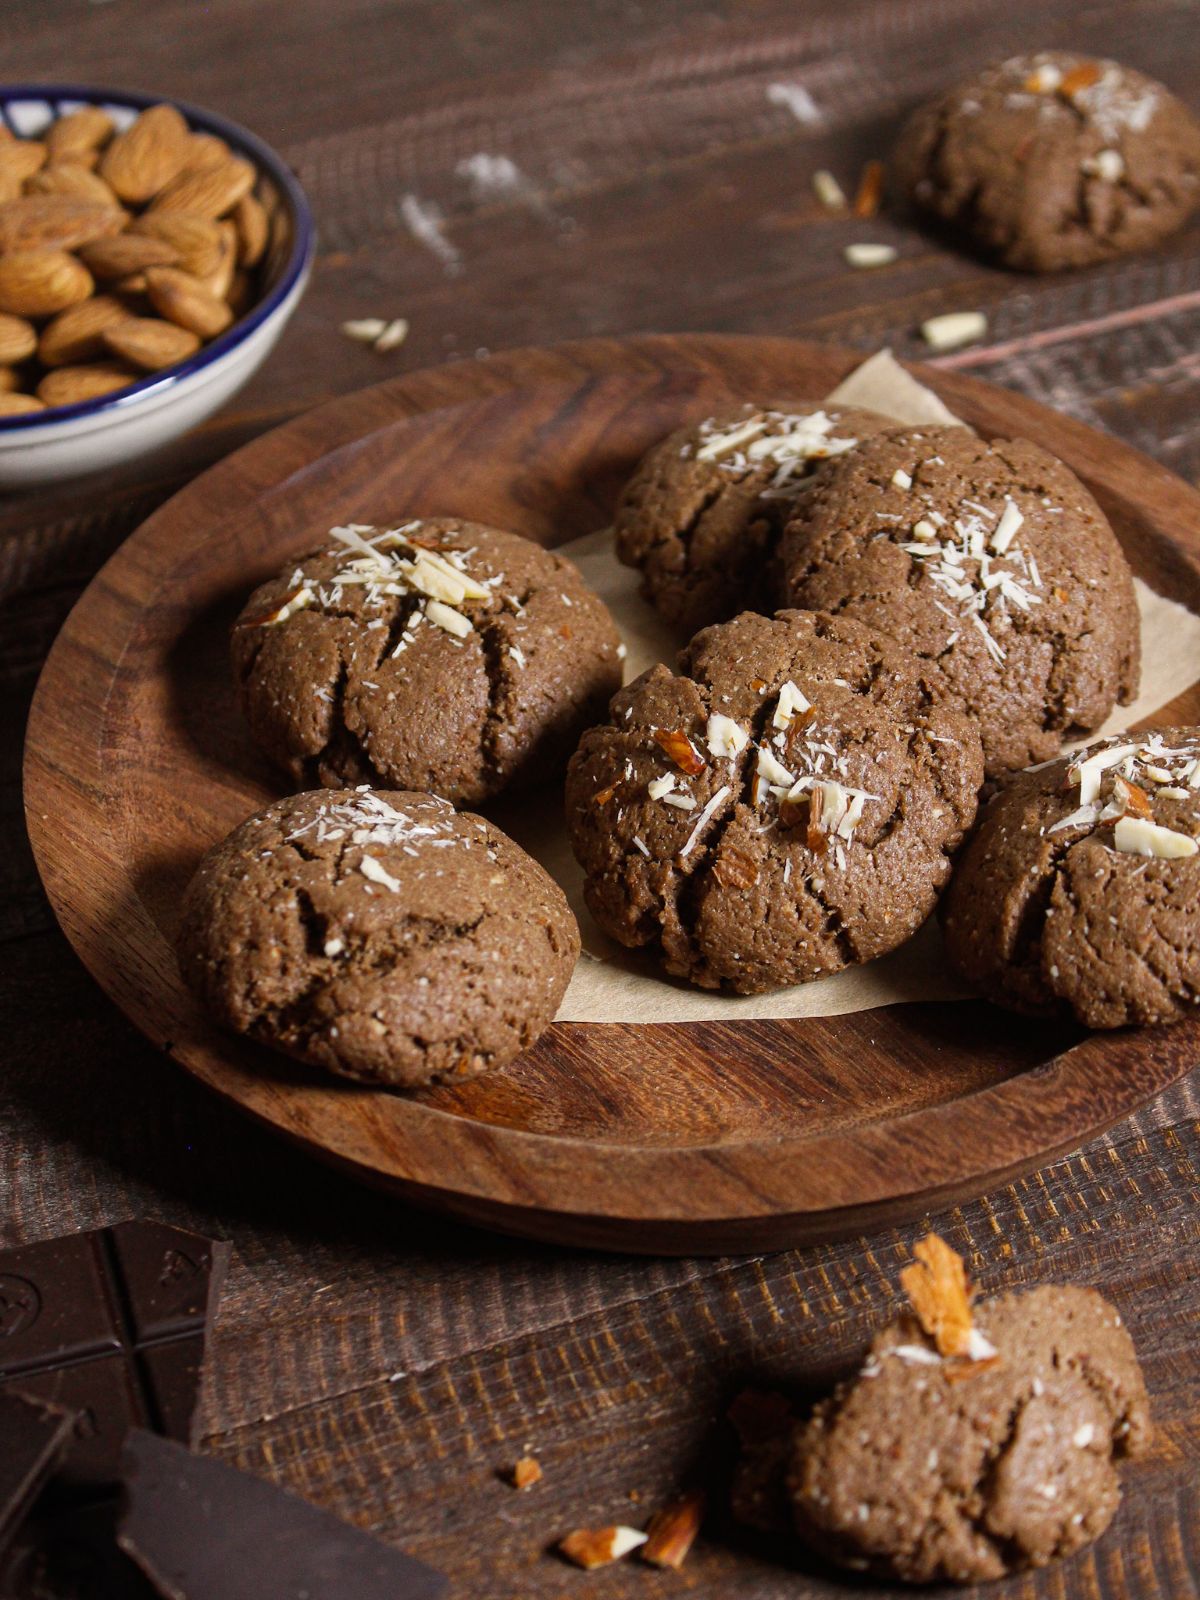 Super delicious Almond Chocolate Cookies